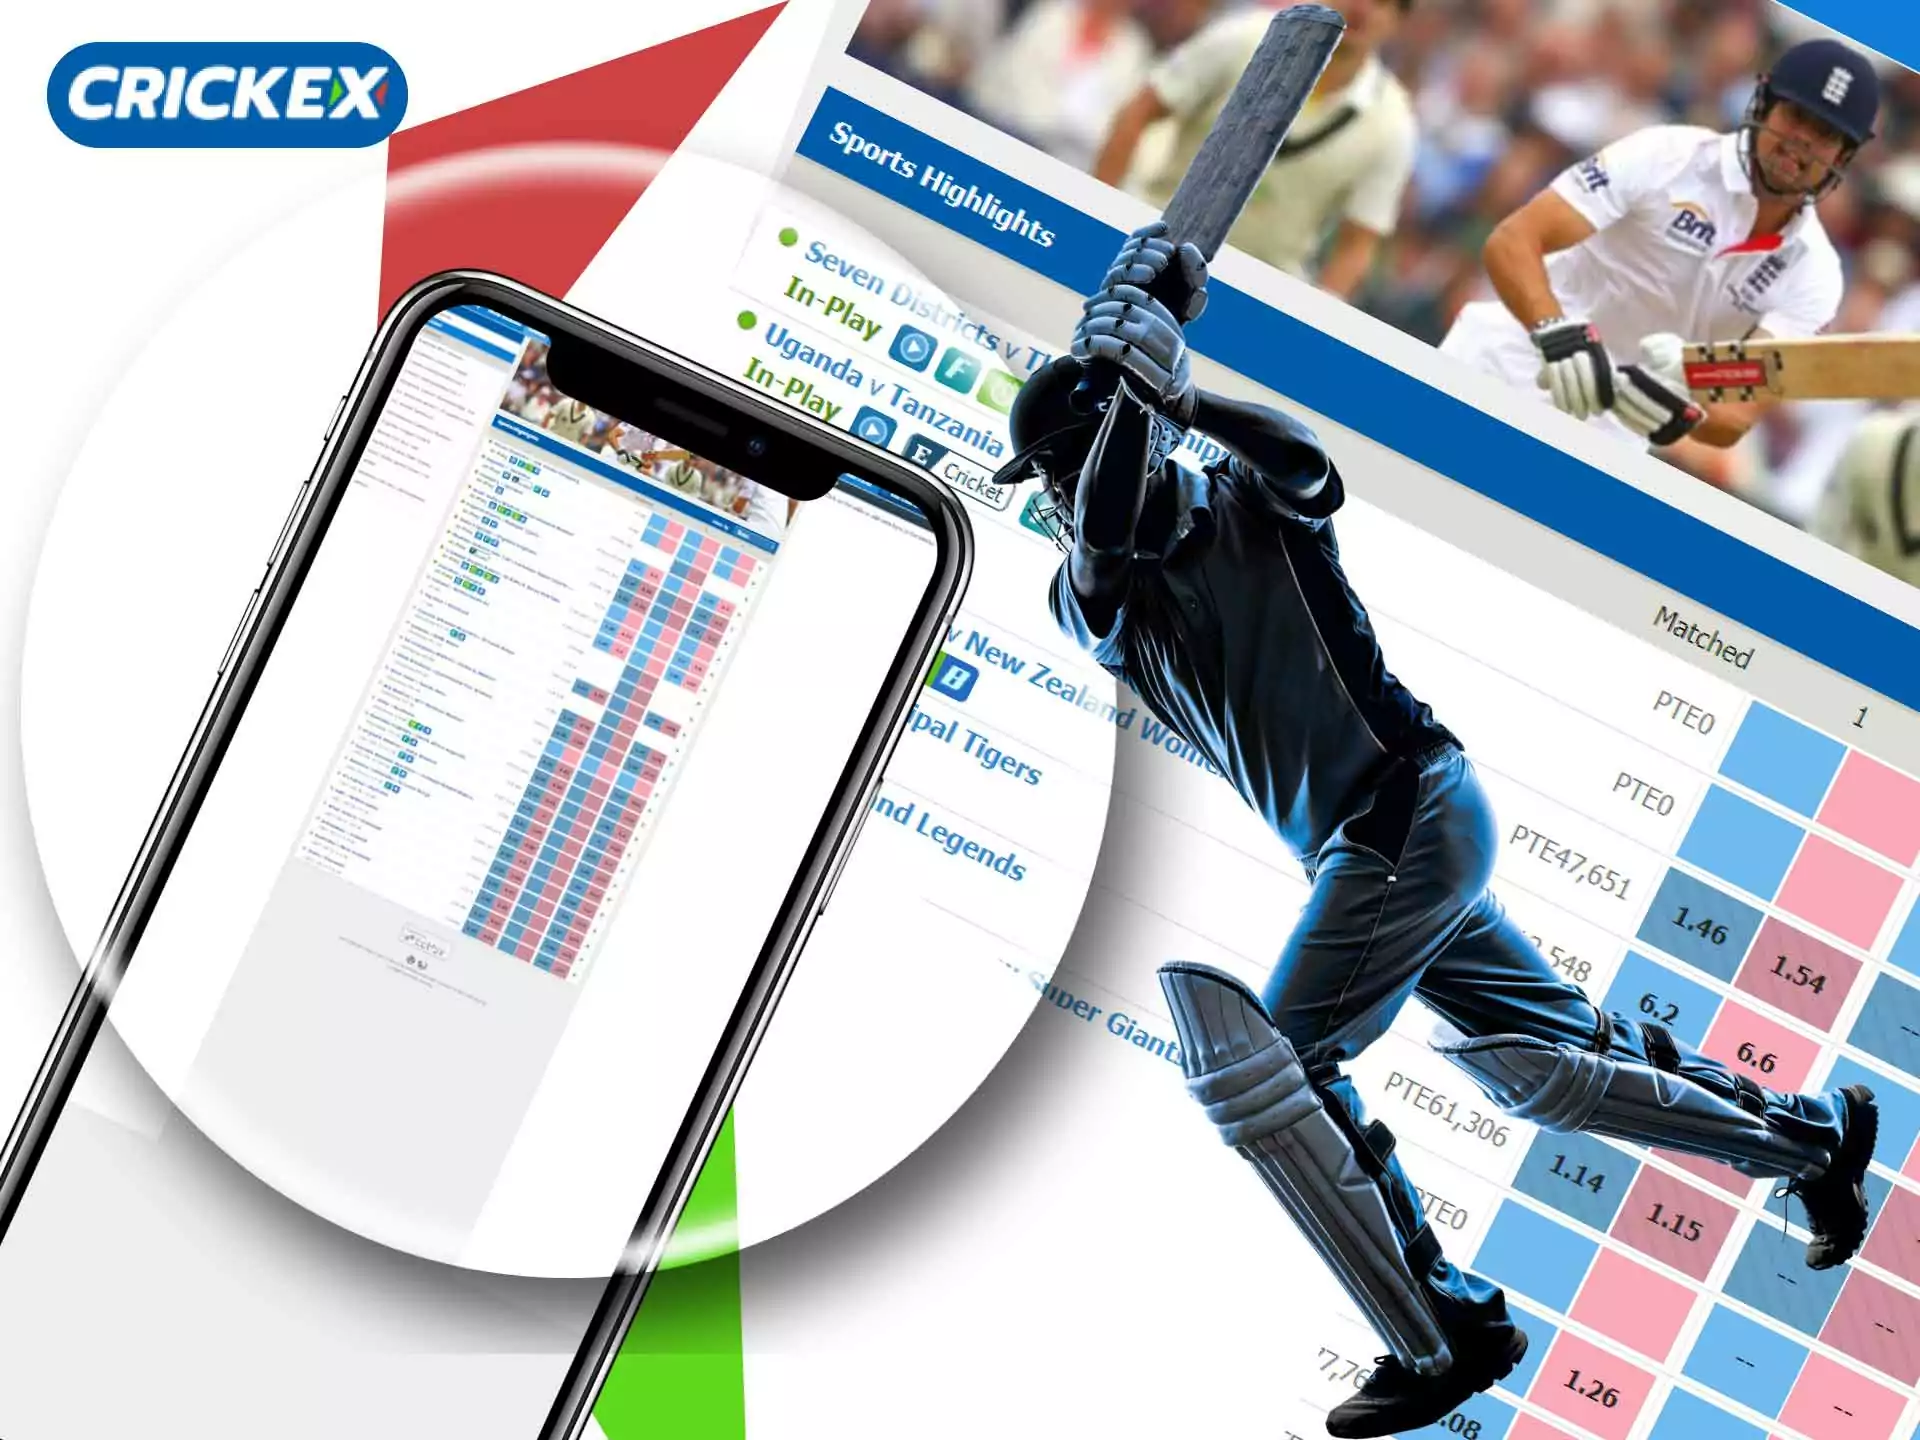 There is also a mobile version of the Crickex app.